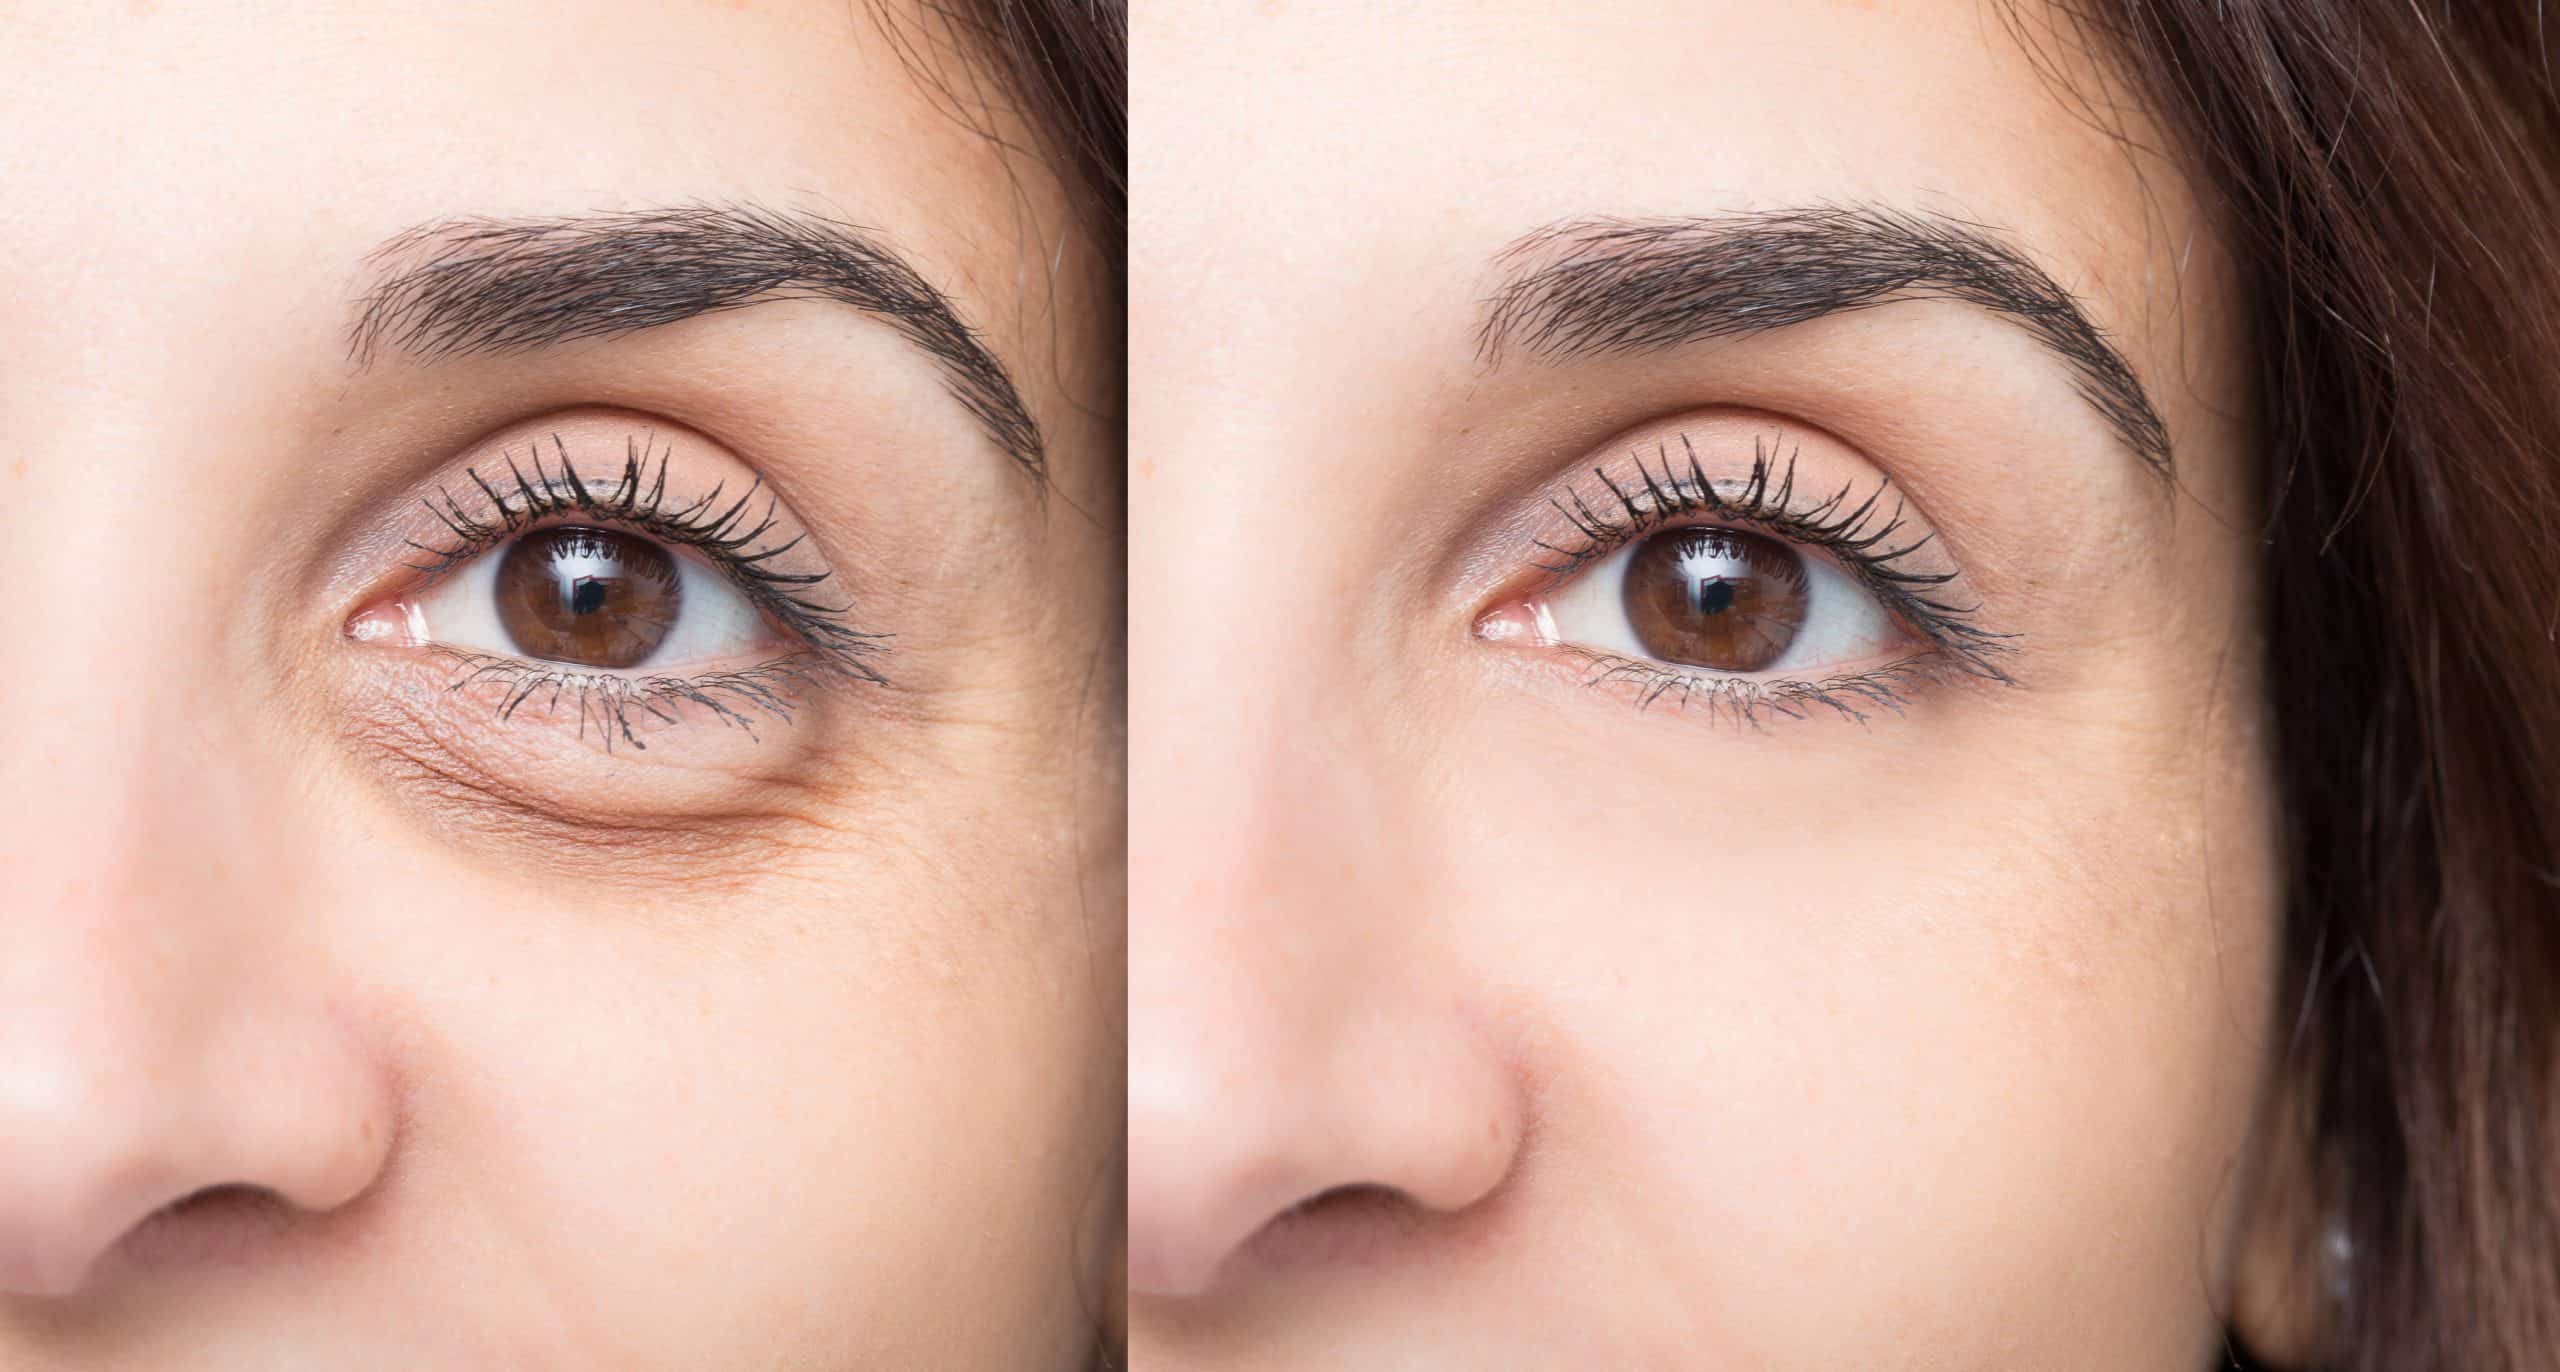 How to Get Rid of Puffy Eyes